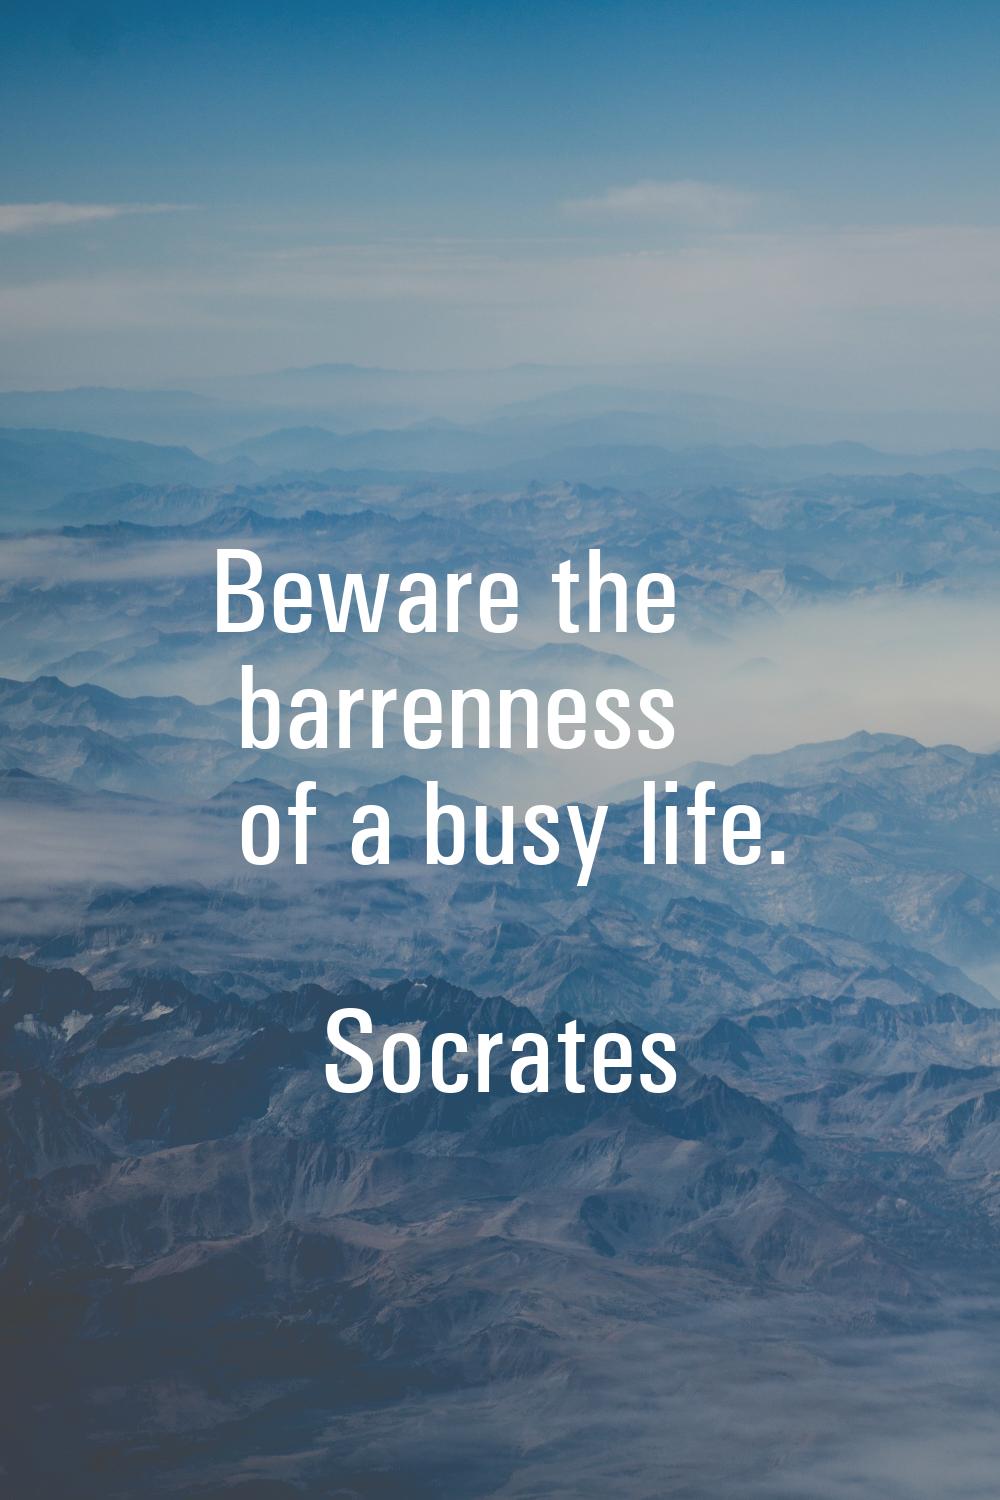 Beware the barrenness of a busy life.